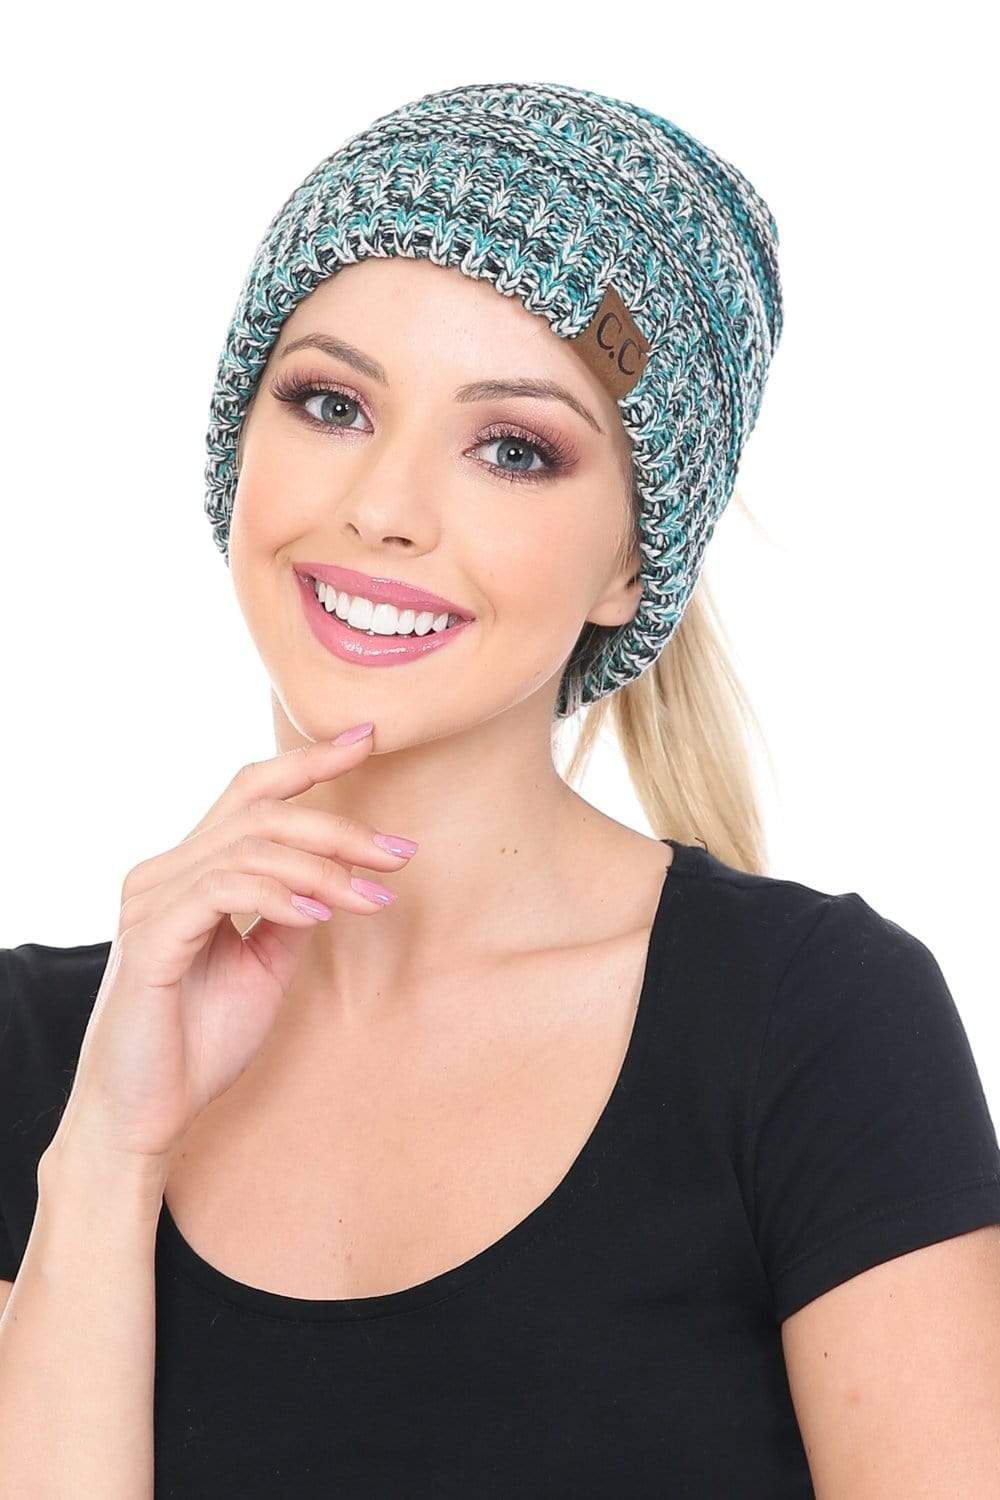 C.C Apparel 3 Tone Teal C.C MB816 - Soft Stretch Cable Knit Warm Ponytail Hat 4 Toned Mixed Multi Color Beanie